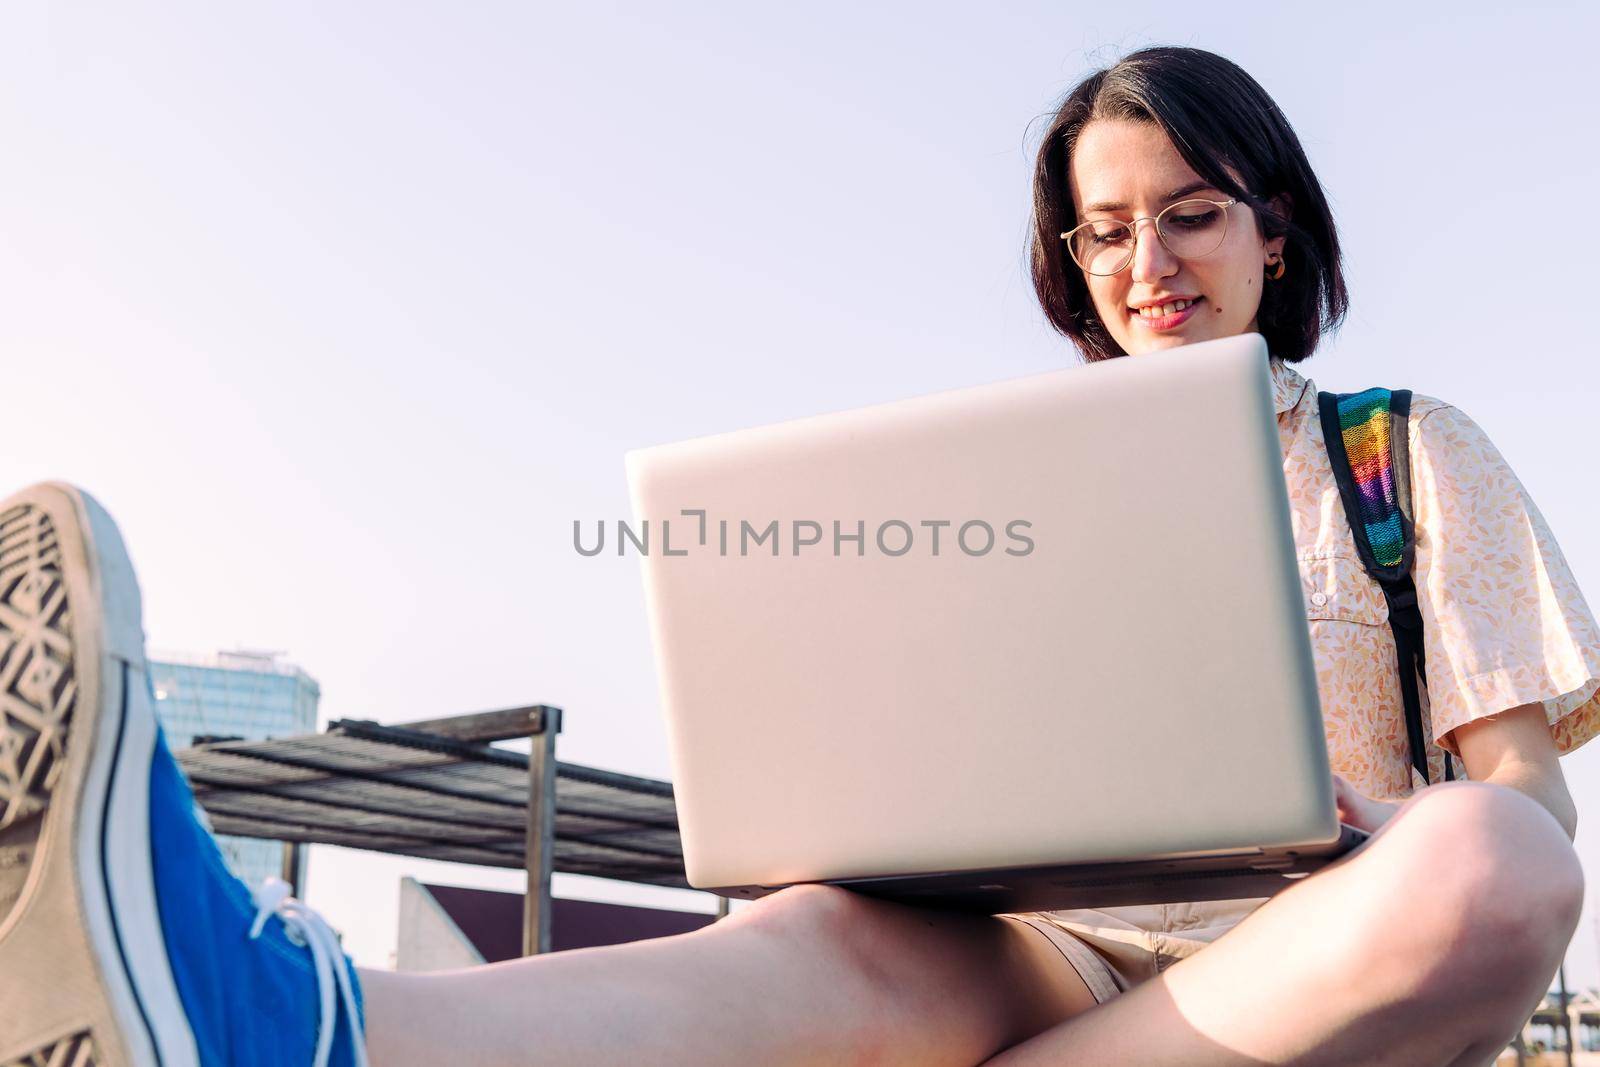 young woman working in the city with her computer and backpack, concept of technology, youth and digital nomad lifestyle, copy space for text